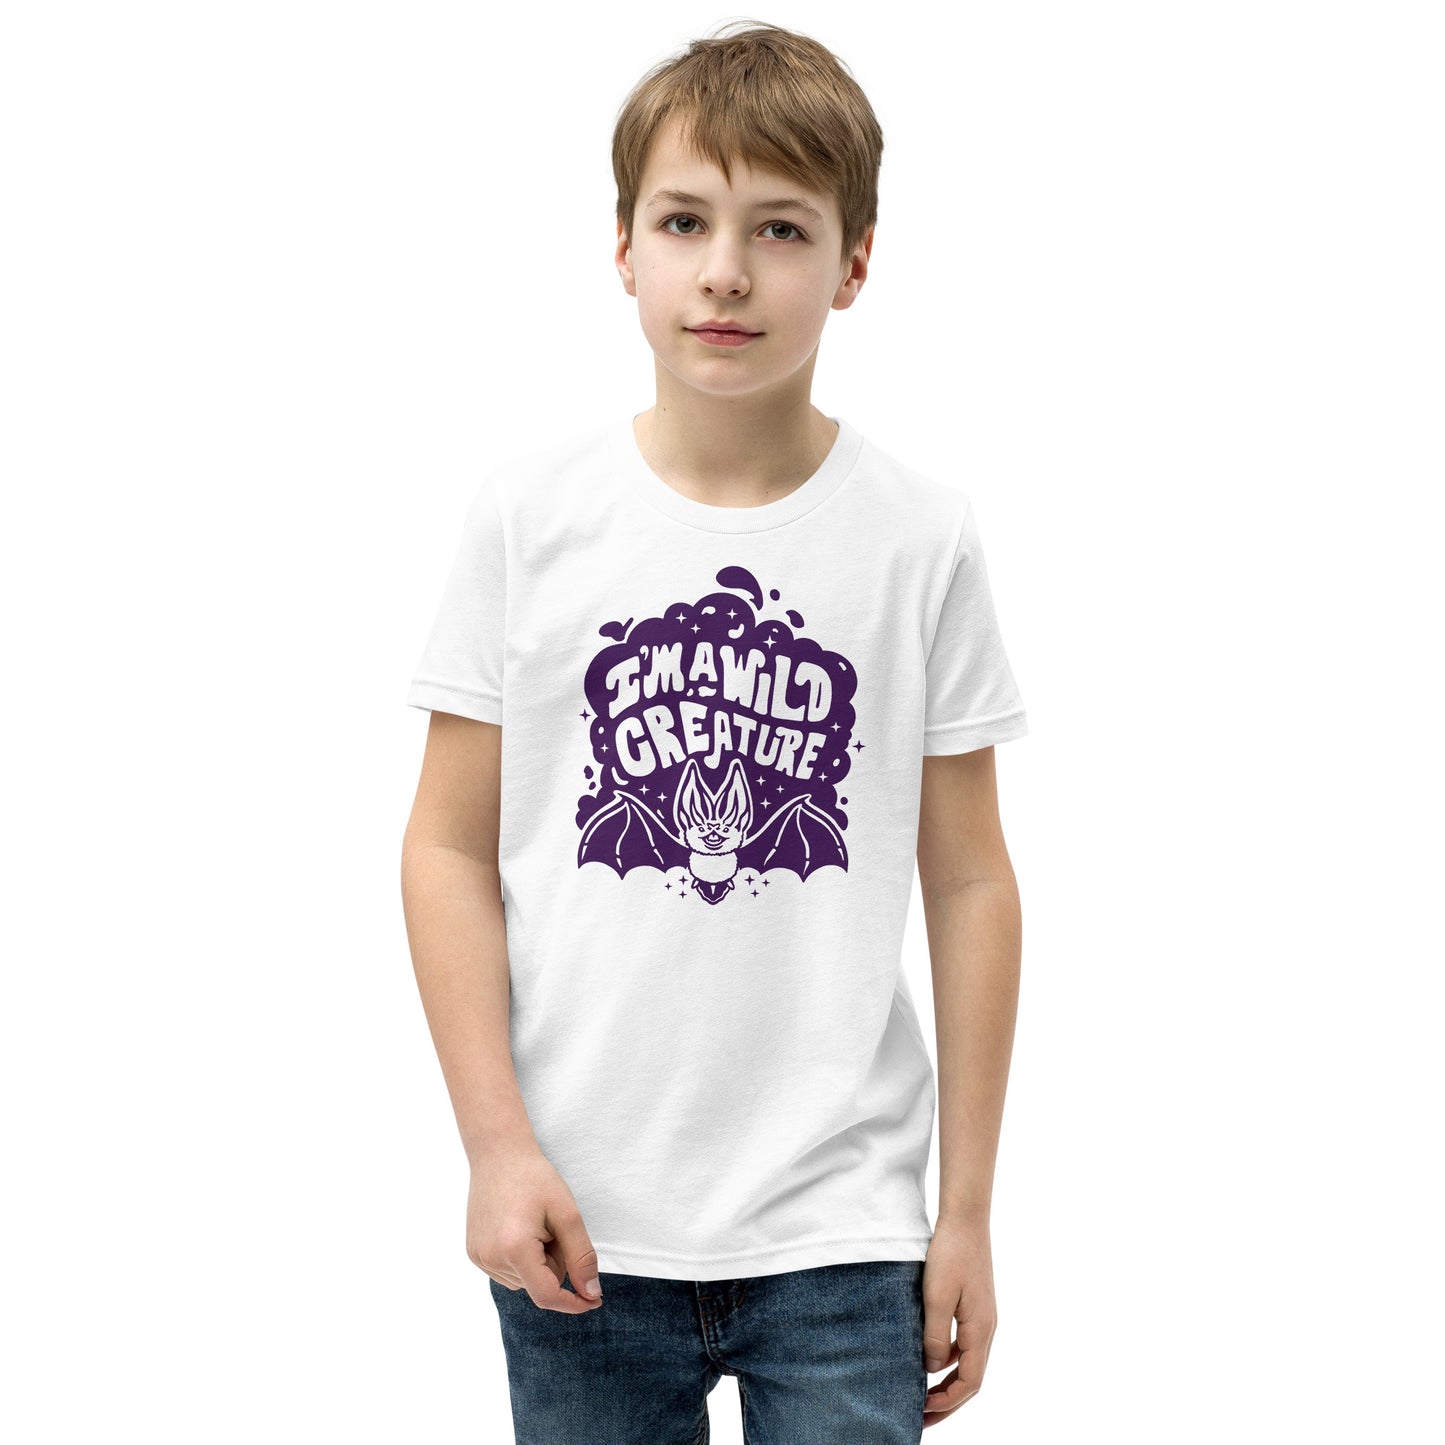 I'm A Wild Creature Youth Short Sleeve T-Shirt